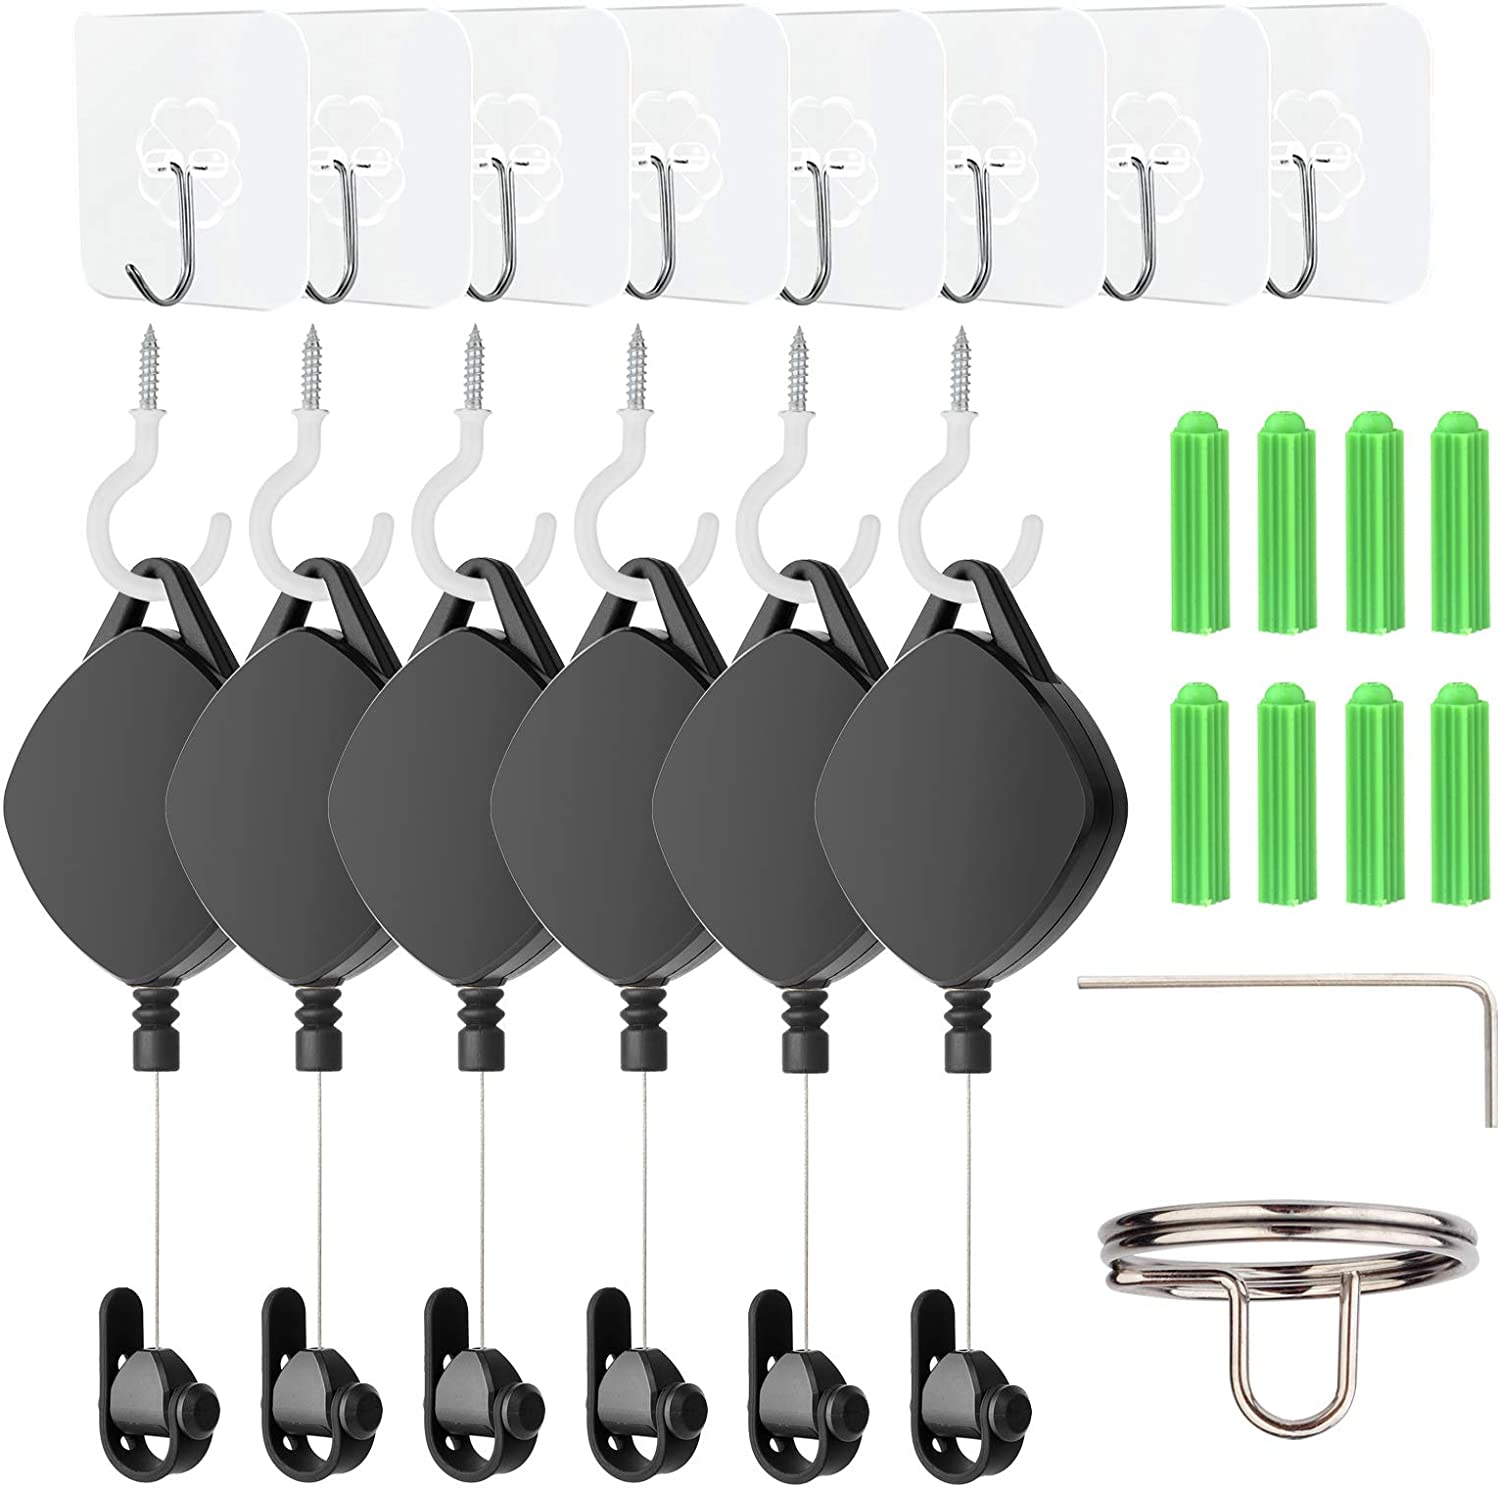 VR Cable Management System, Ceiling Hooks with Retractable Carabiner (Black)